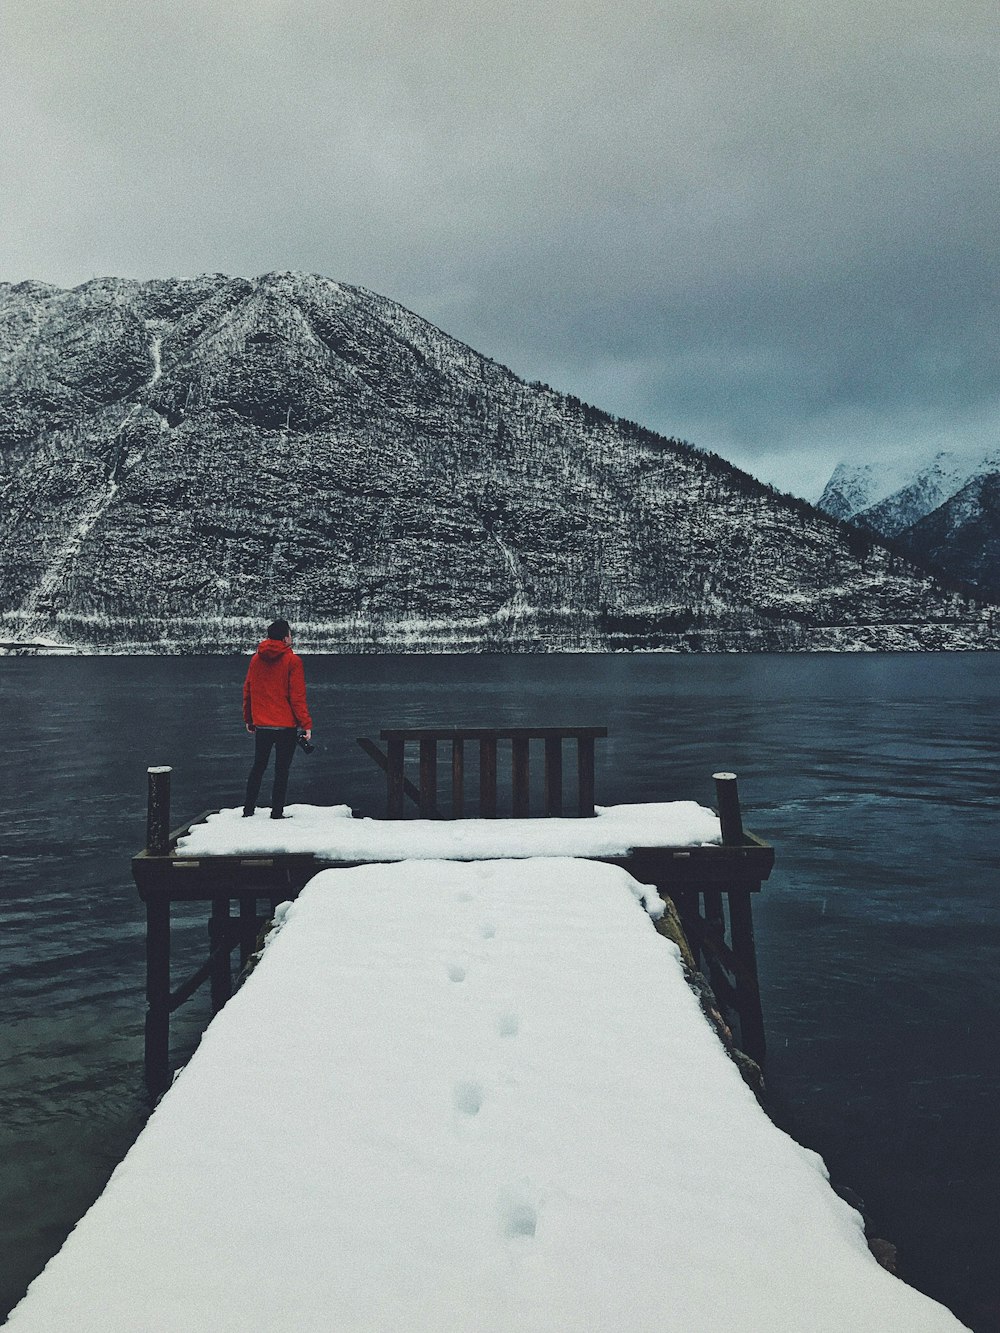 person standing on dock covered with snow looking at mountain across body of water